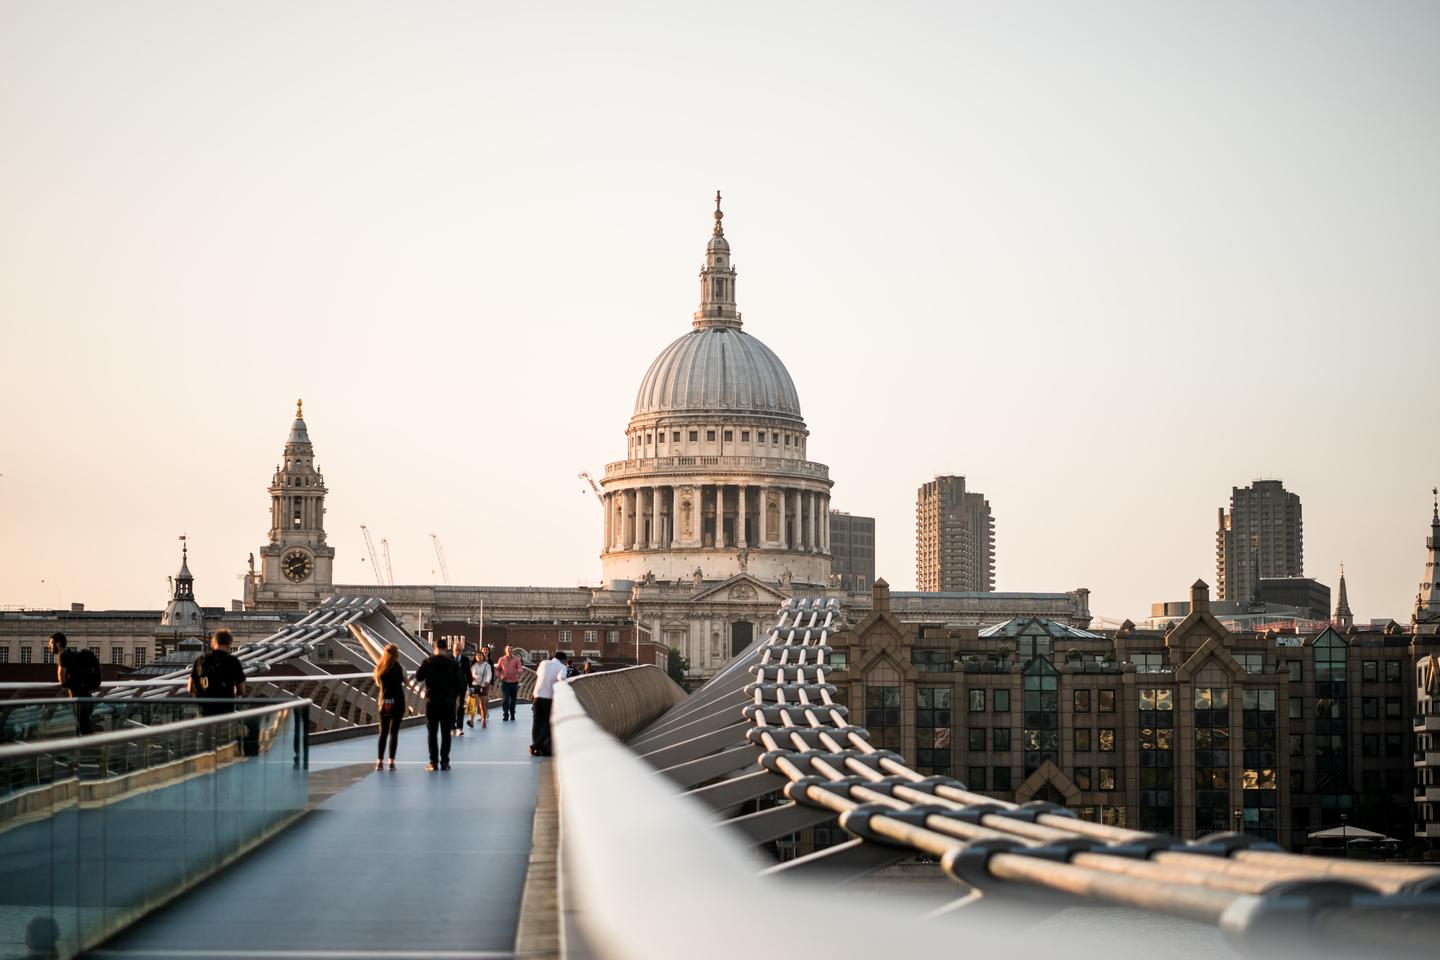 A picture of London's Millennium Bridge, looking towards St Paul's cathedral.